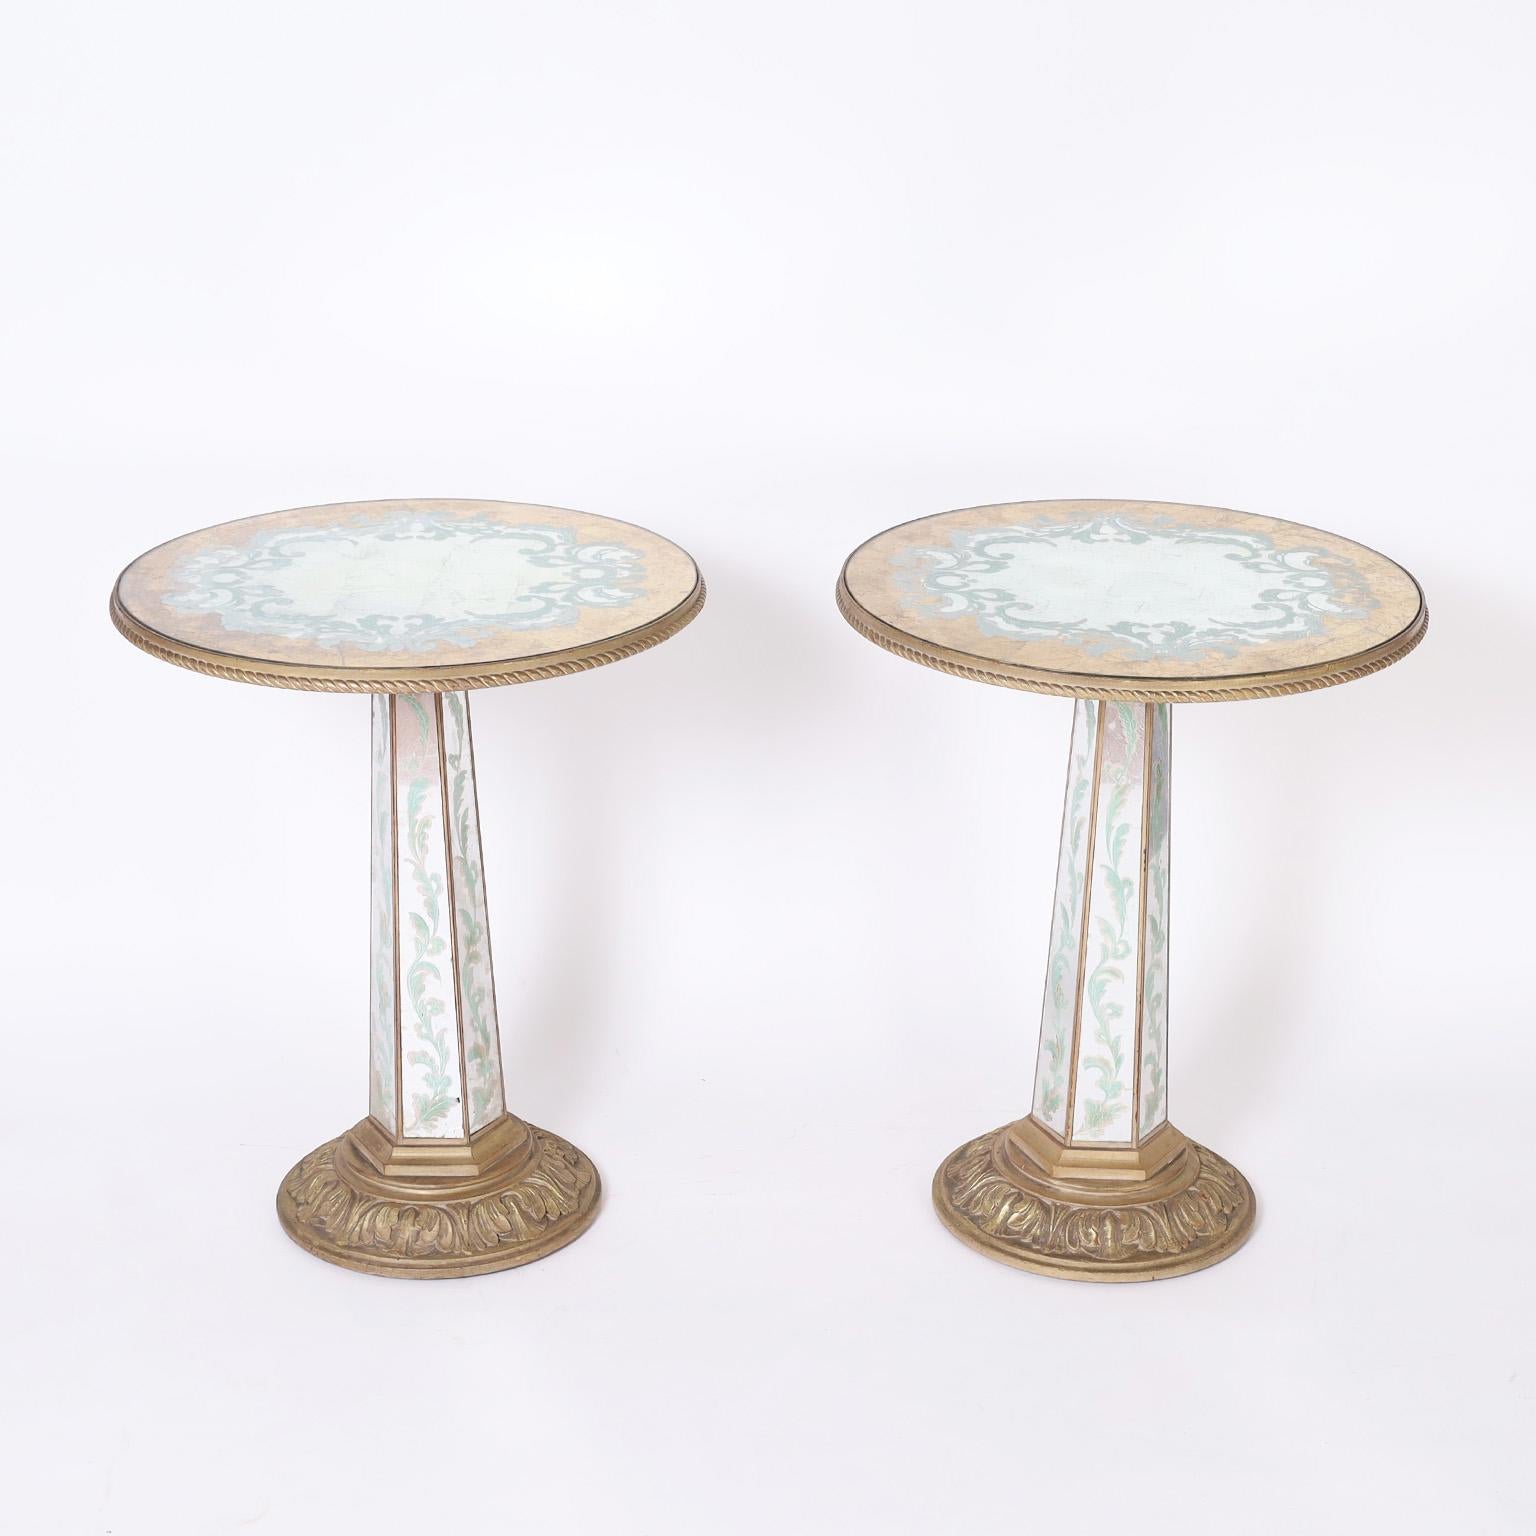 Standout pair of vintage Venetian style stands with round tops decorated in an eglomise technique with floral designs over gold and silver leaf. The hexagon pedestal has leaf designs and sits on a gilt carved wood base. As seen in the last photo of